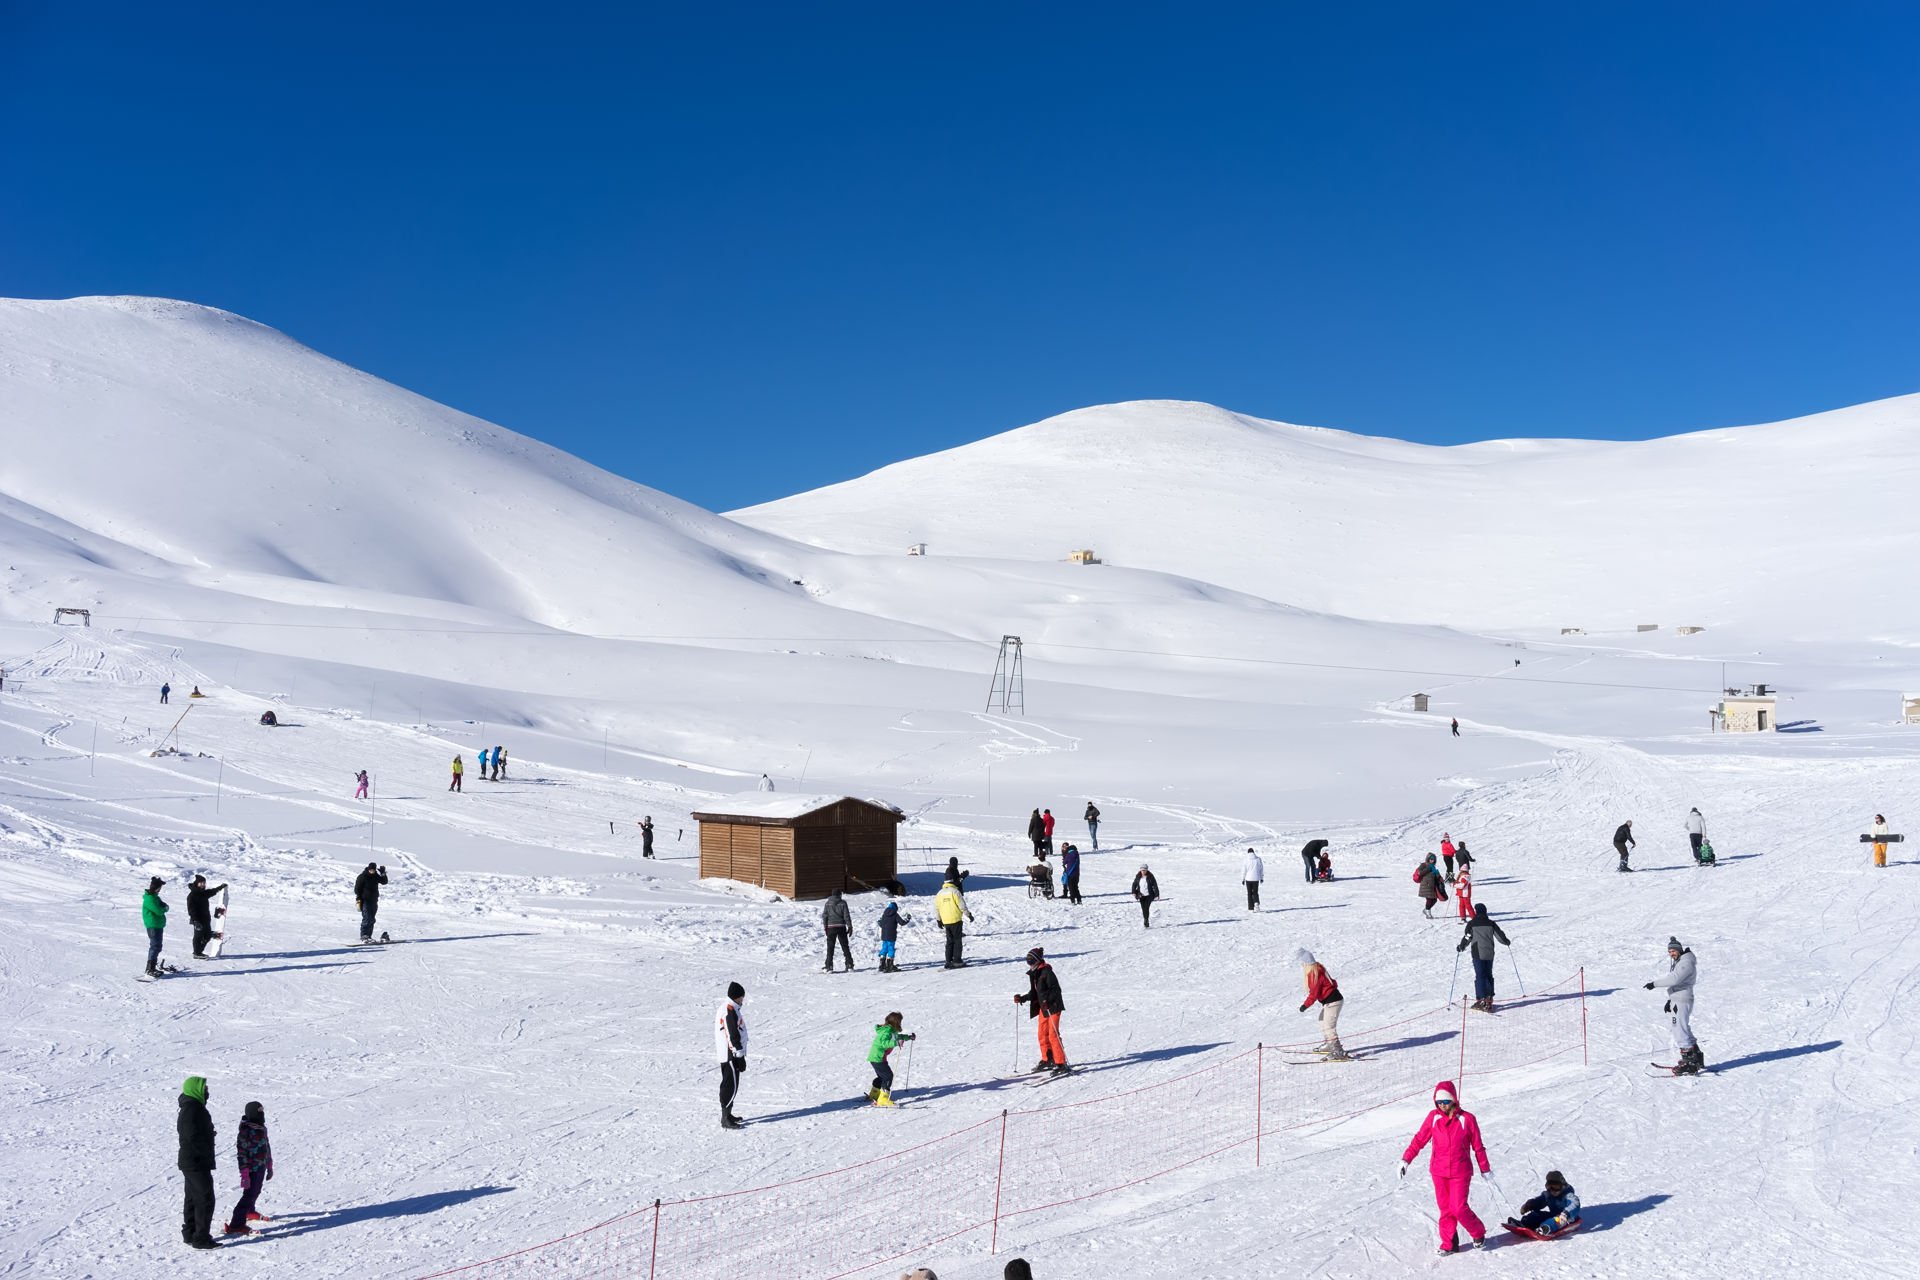 The ski resort of Falakro Mountain is located in the area of Dramas